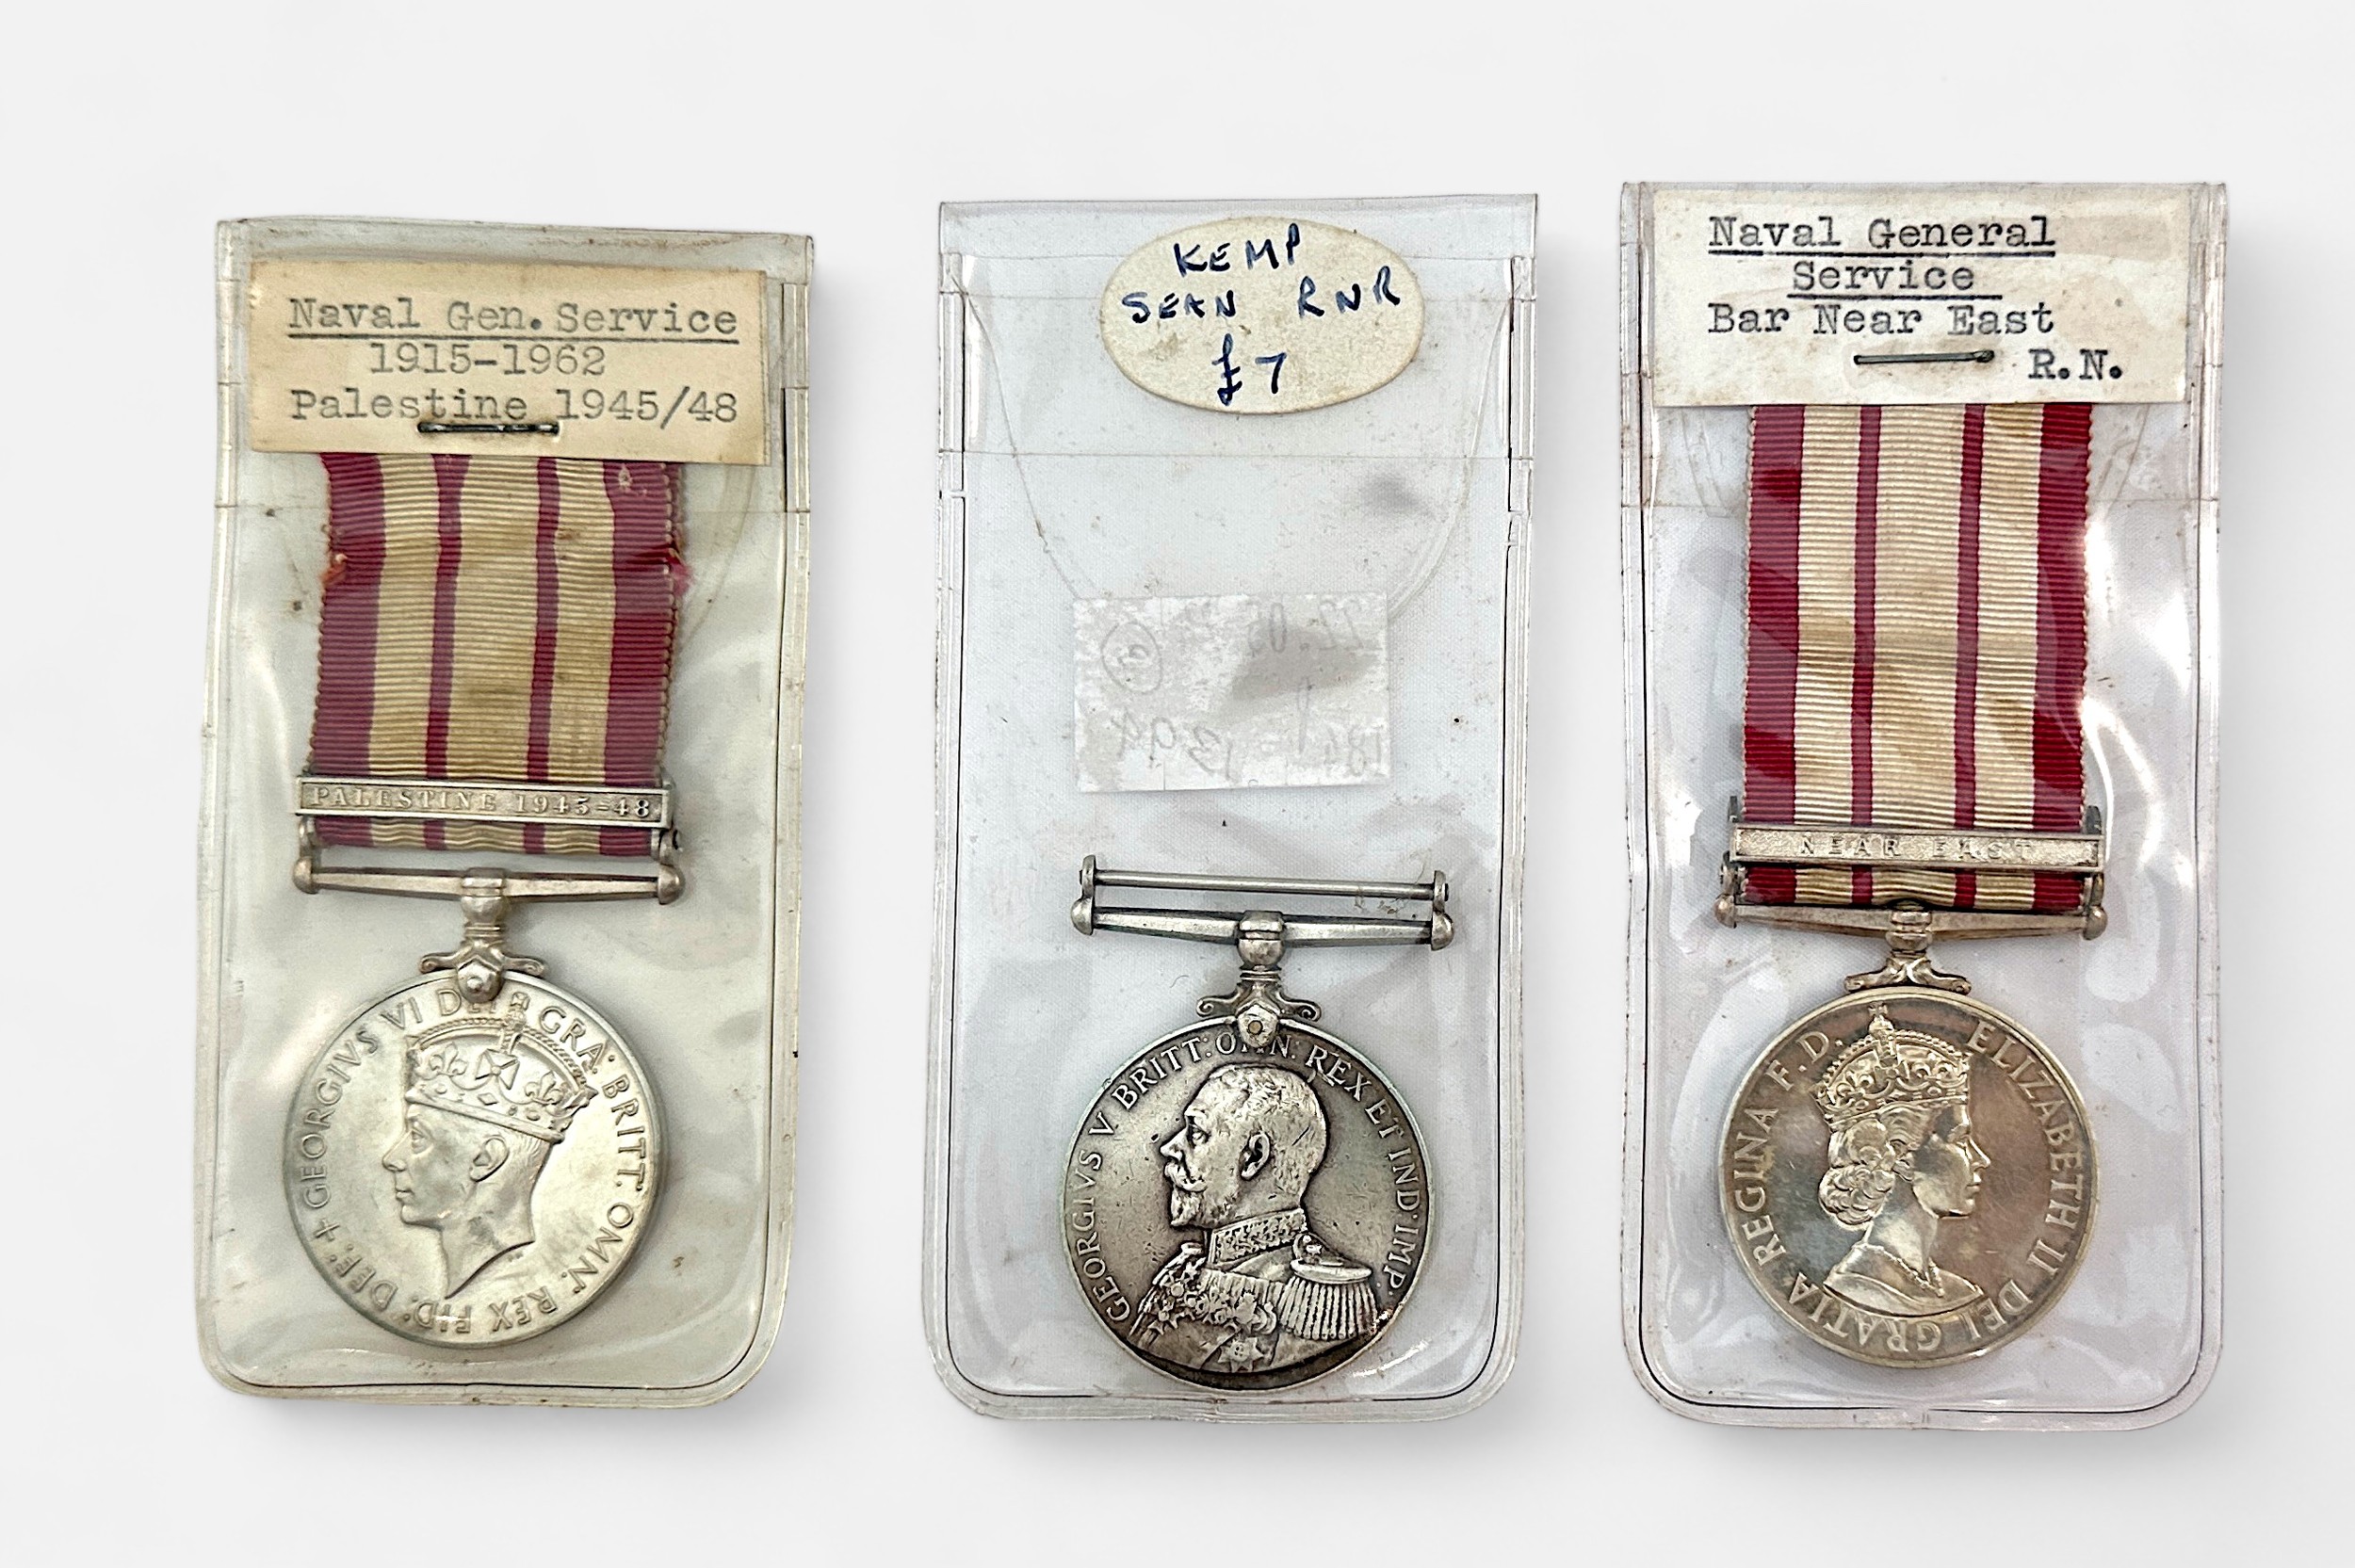 Two Naval General Service Medals comprising: Geoege VI NGSM with Palestine 1945-48 Clasp to CH/X.